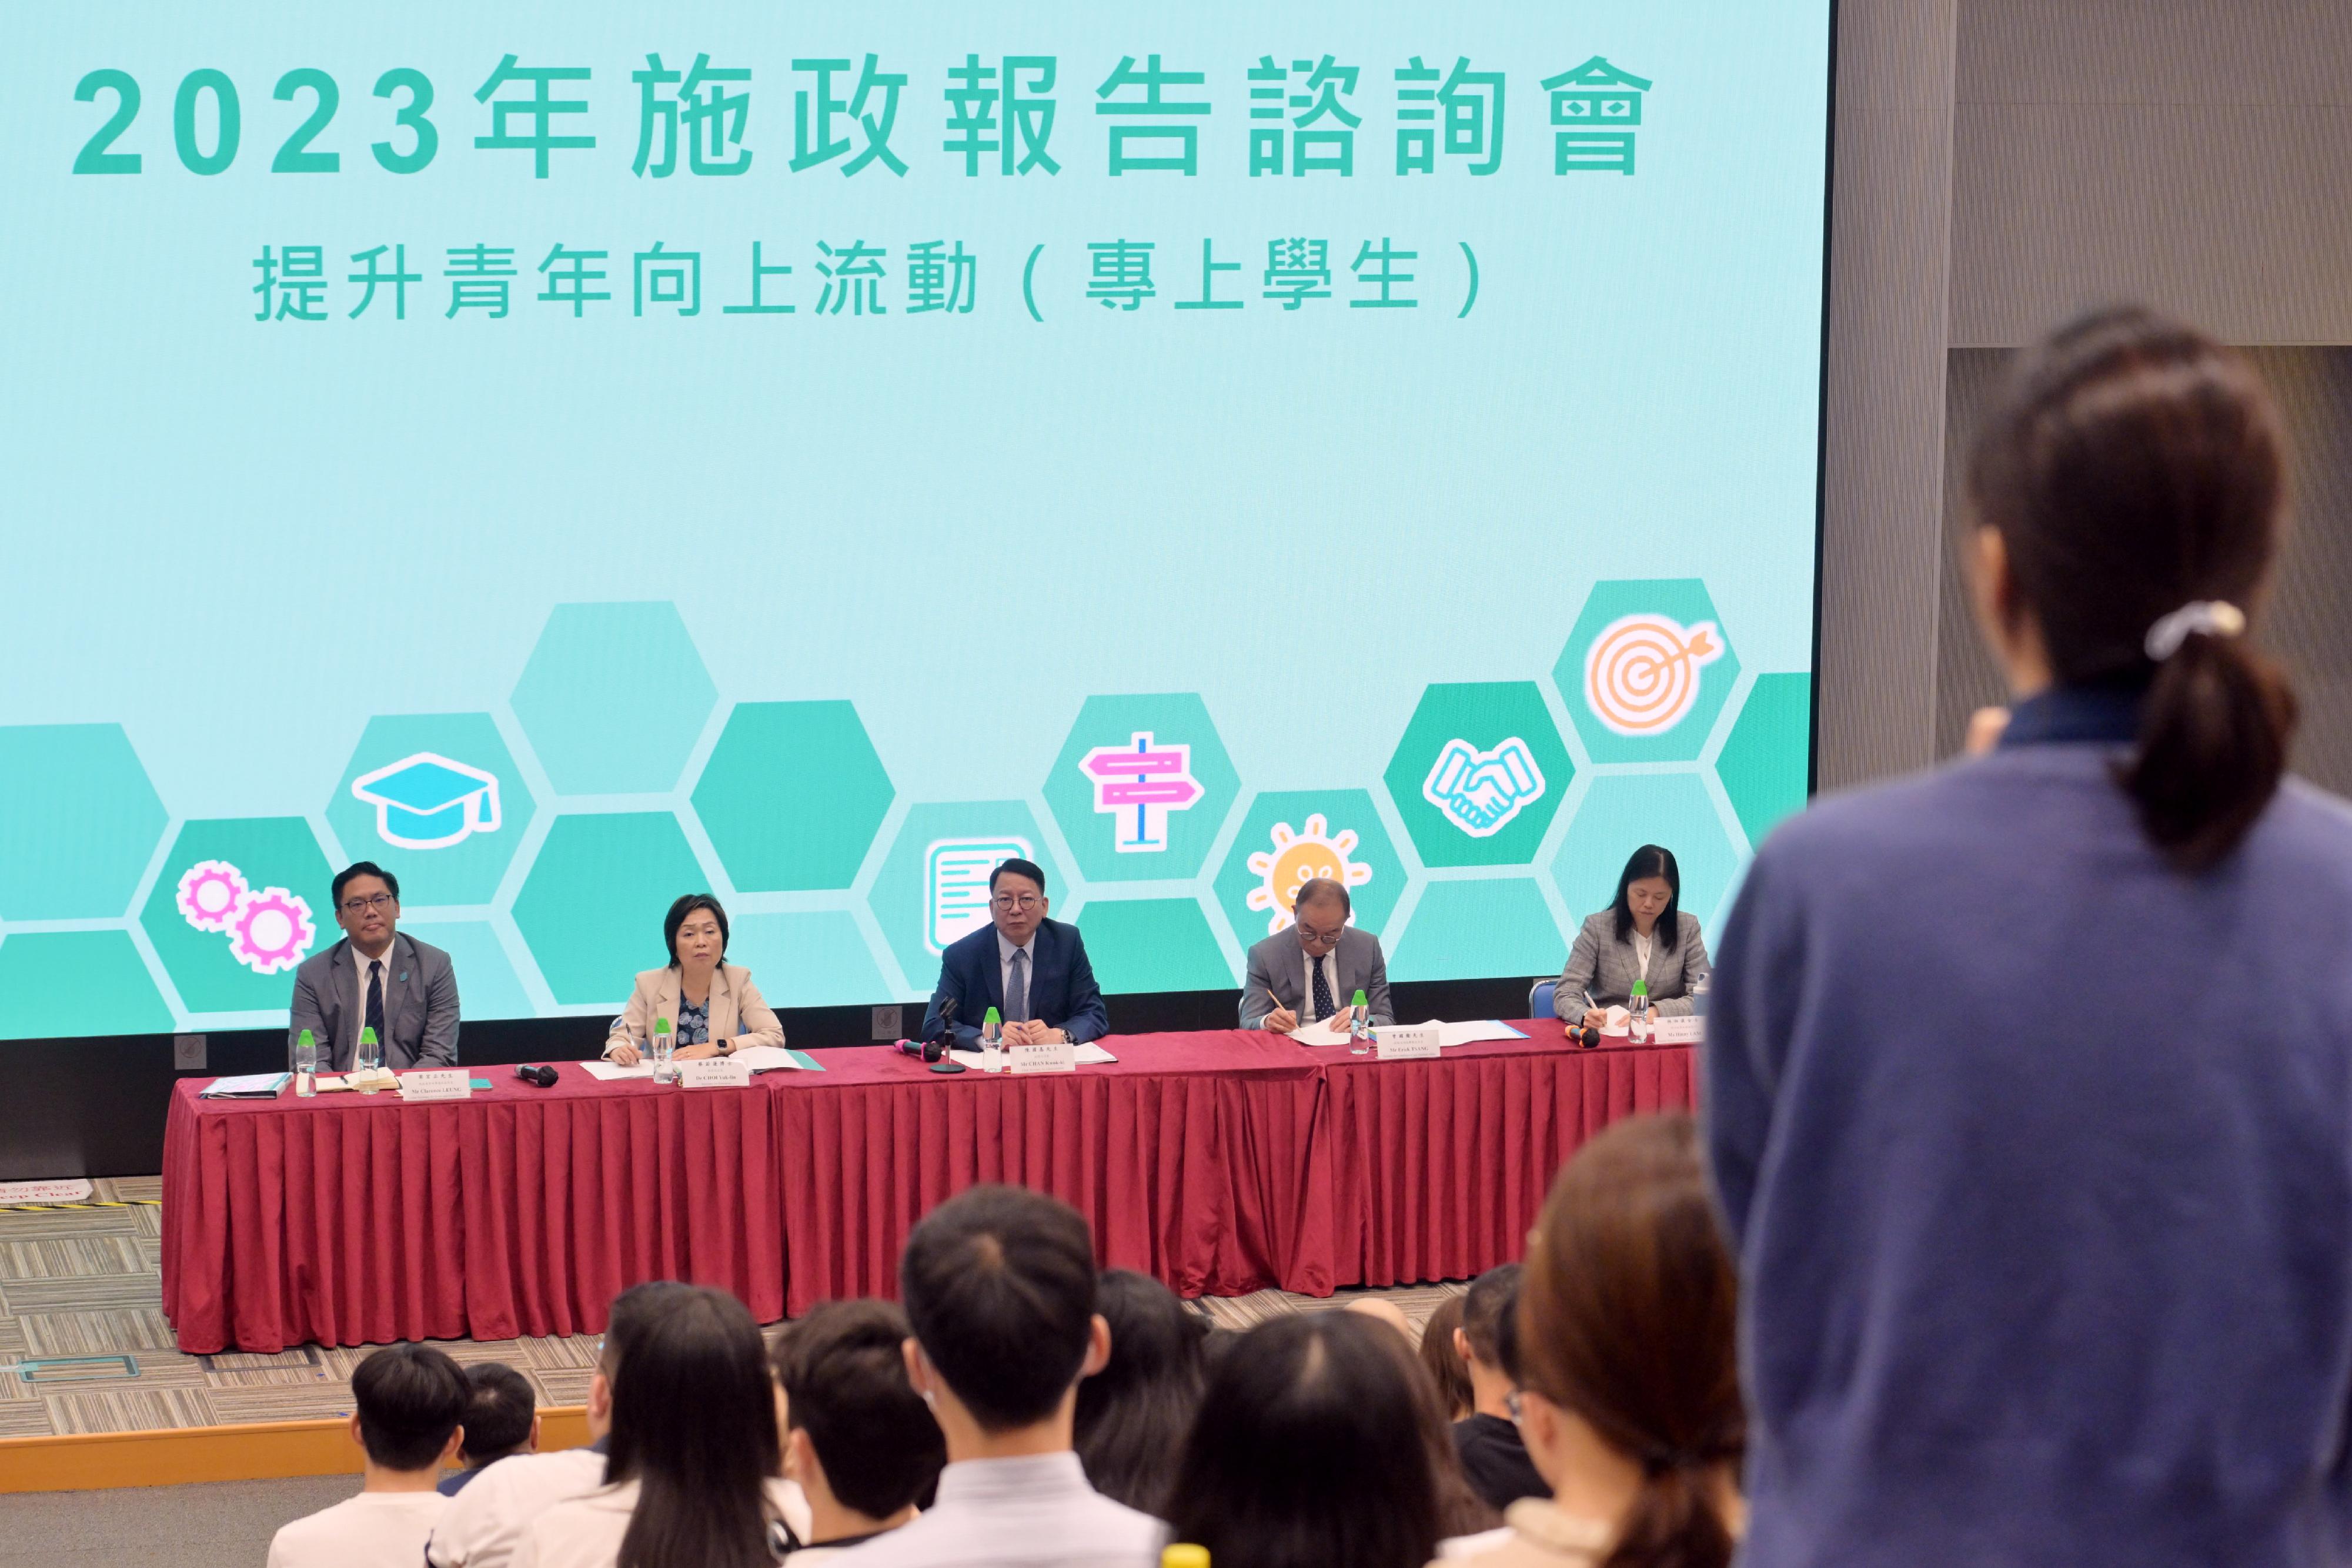 The Chief Secretary for Administration, Mr Chan Kwok-ki, attended a 2023 Policy Address consultation session today (September 6) to listen to the views and suggestions of post-secondary students on the upcoming Policy Address. Photo shows Mr Chan (centre); the Secretary for Education, Dr Choi Yuk-lin (second left); the Secretary for Constitutional and Mainland Affairs, Mr Erick Tsang Kwok-wai (second right); and the Under Secretary for Home and Youth Affairs, Mr Clarence Leung (first left), listening to views of a student at the consultation session.